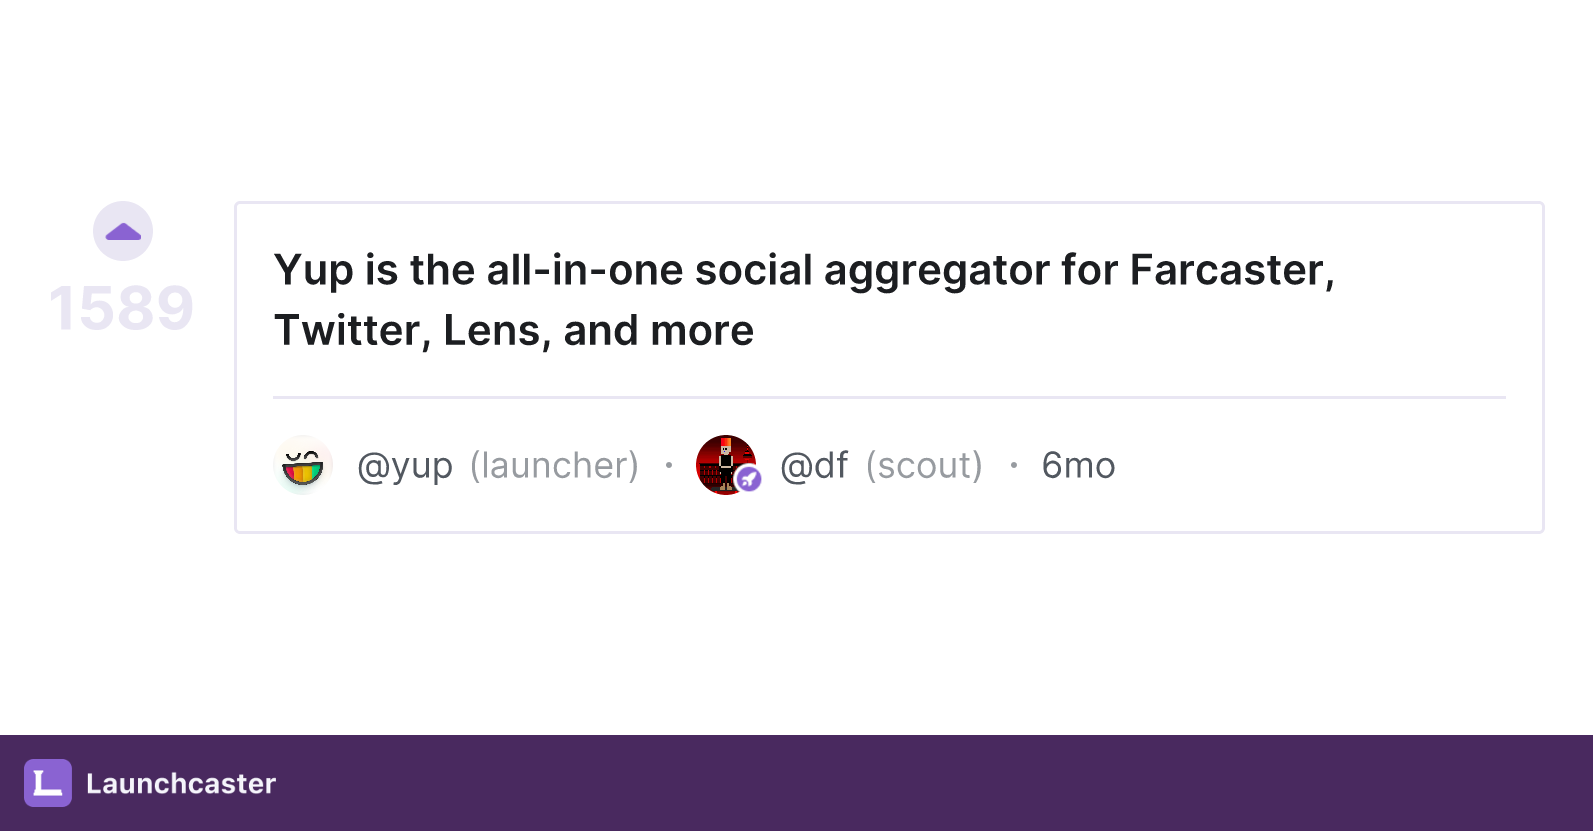 @yup’s Launchcaster: “Yup is the all-in-one social aggregator for Farcaster, Twitter, Lens, and more”